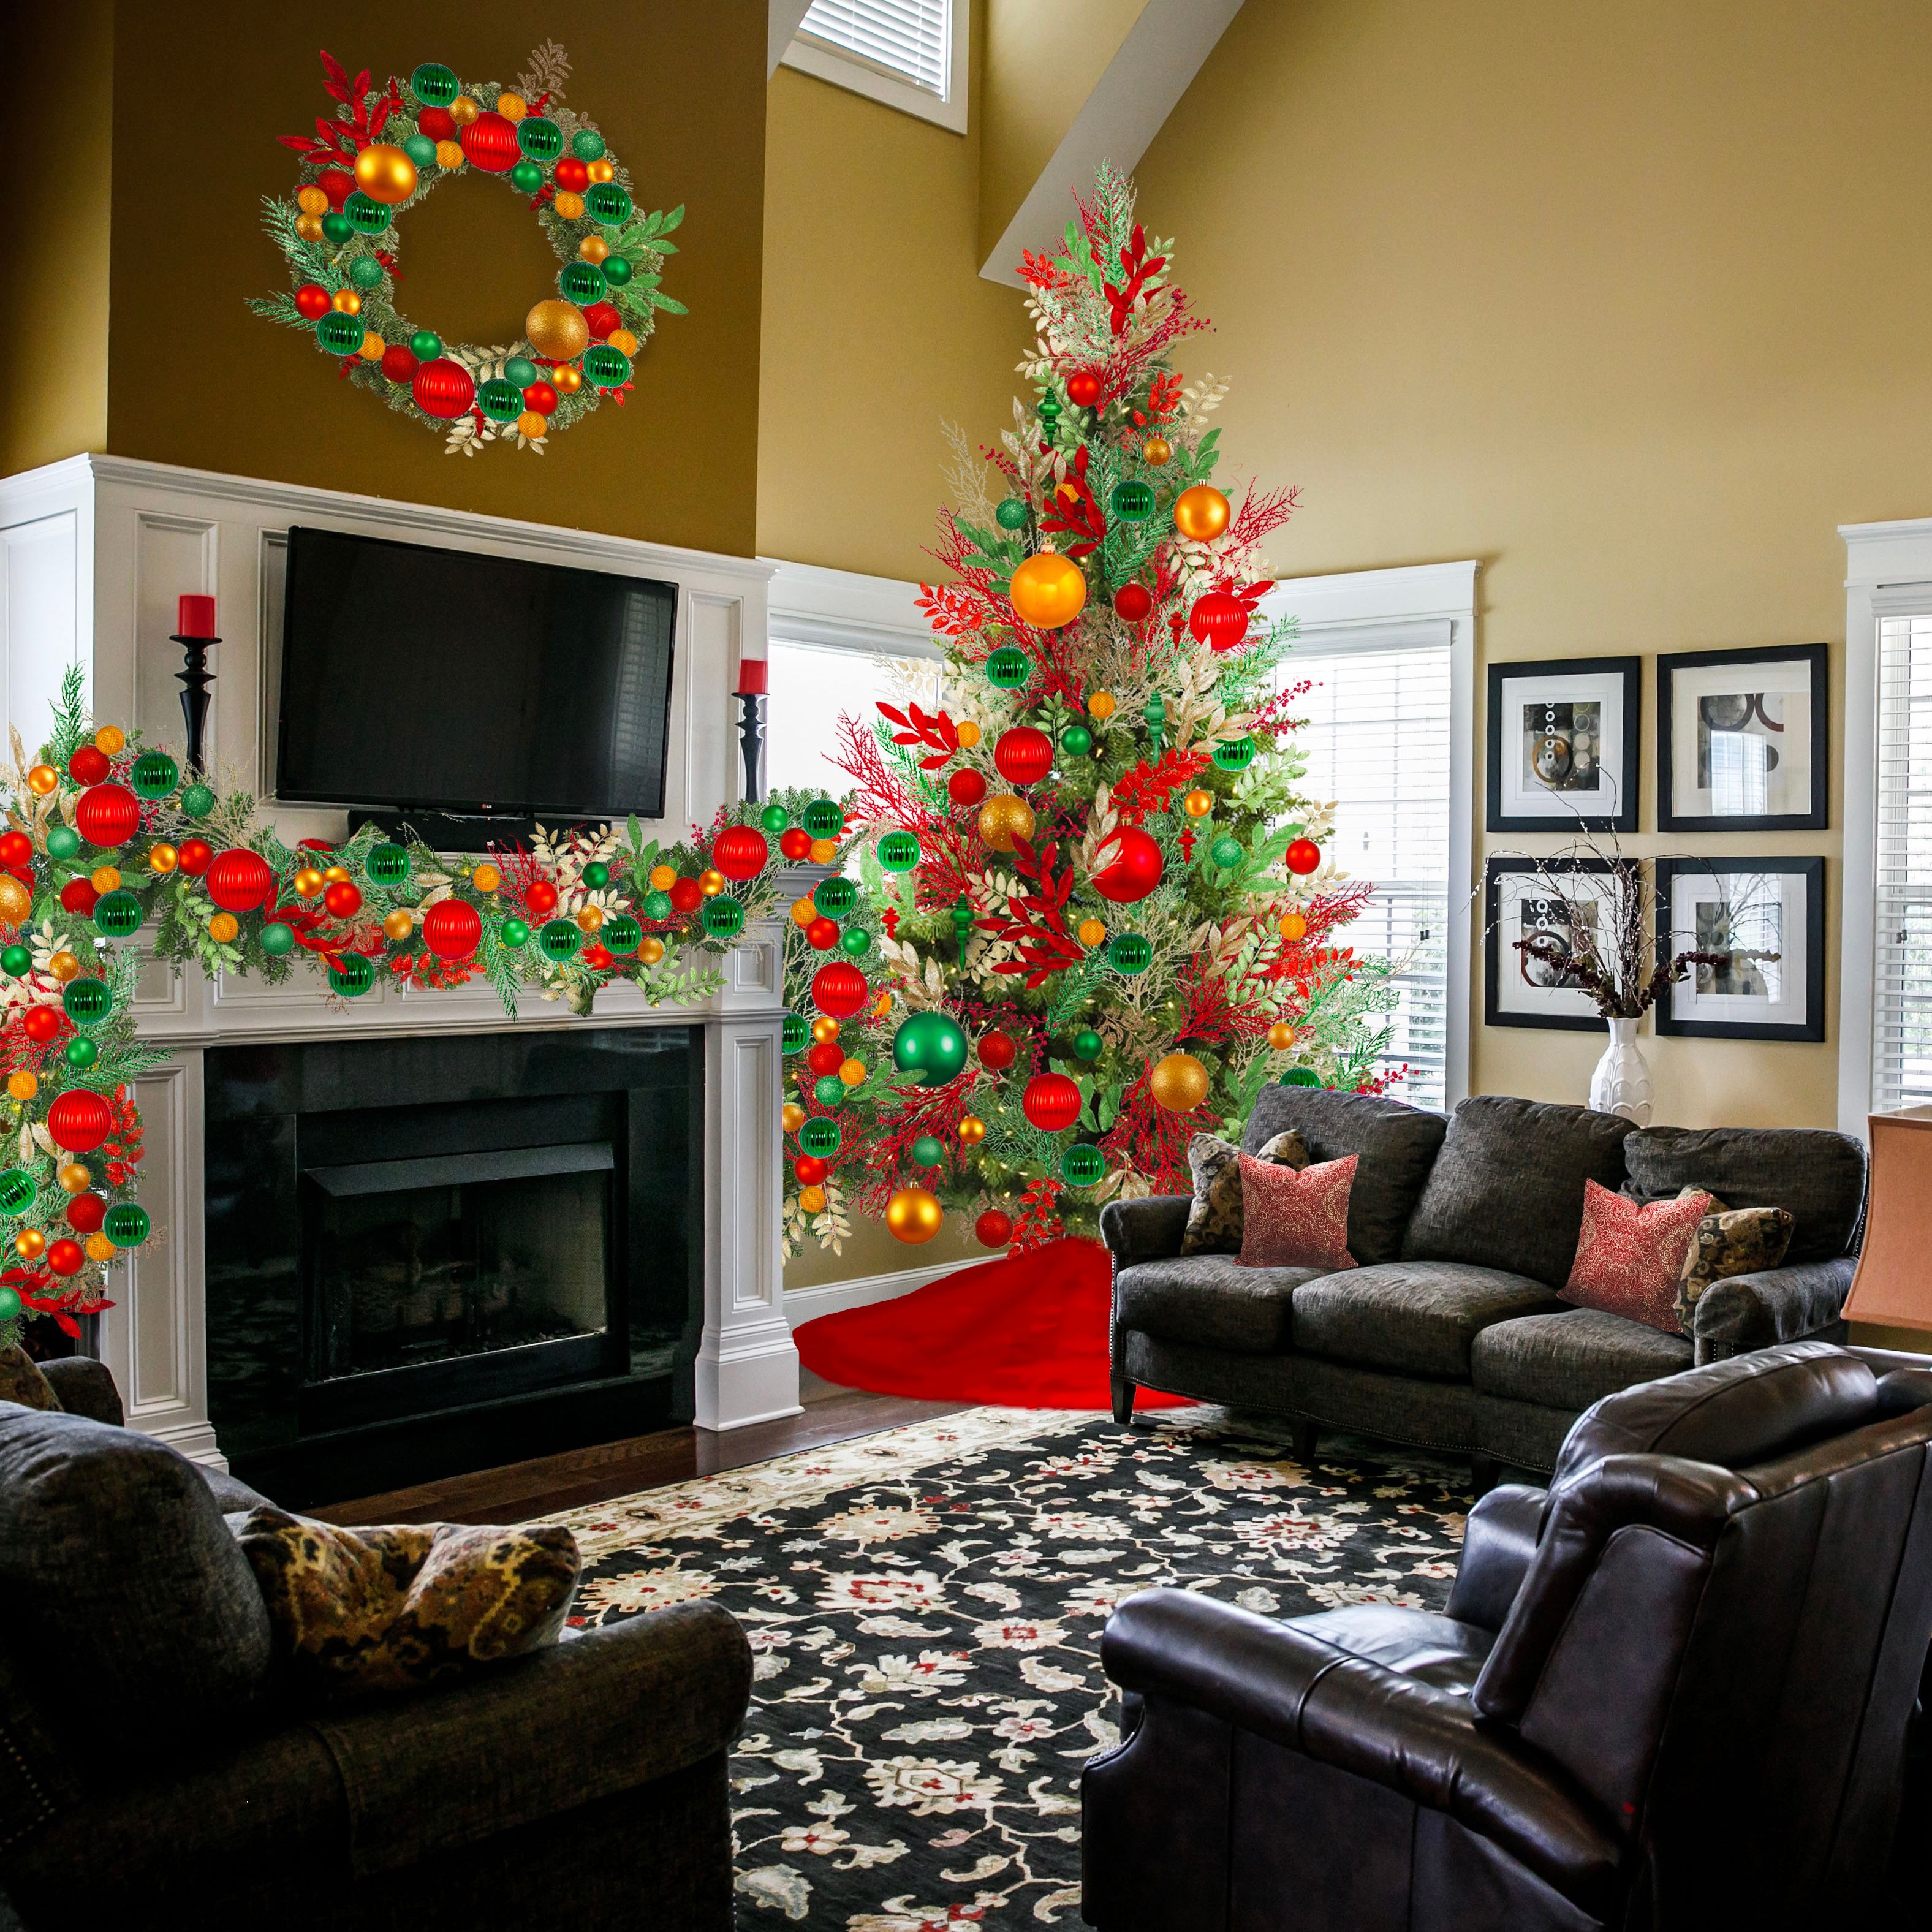 Decorated Christmas tree in living room